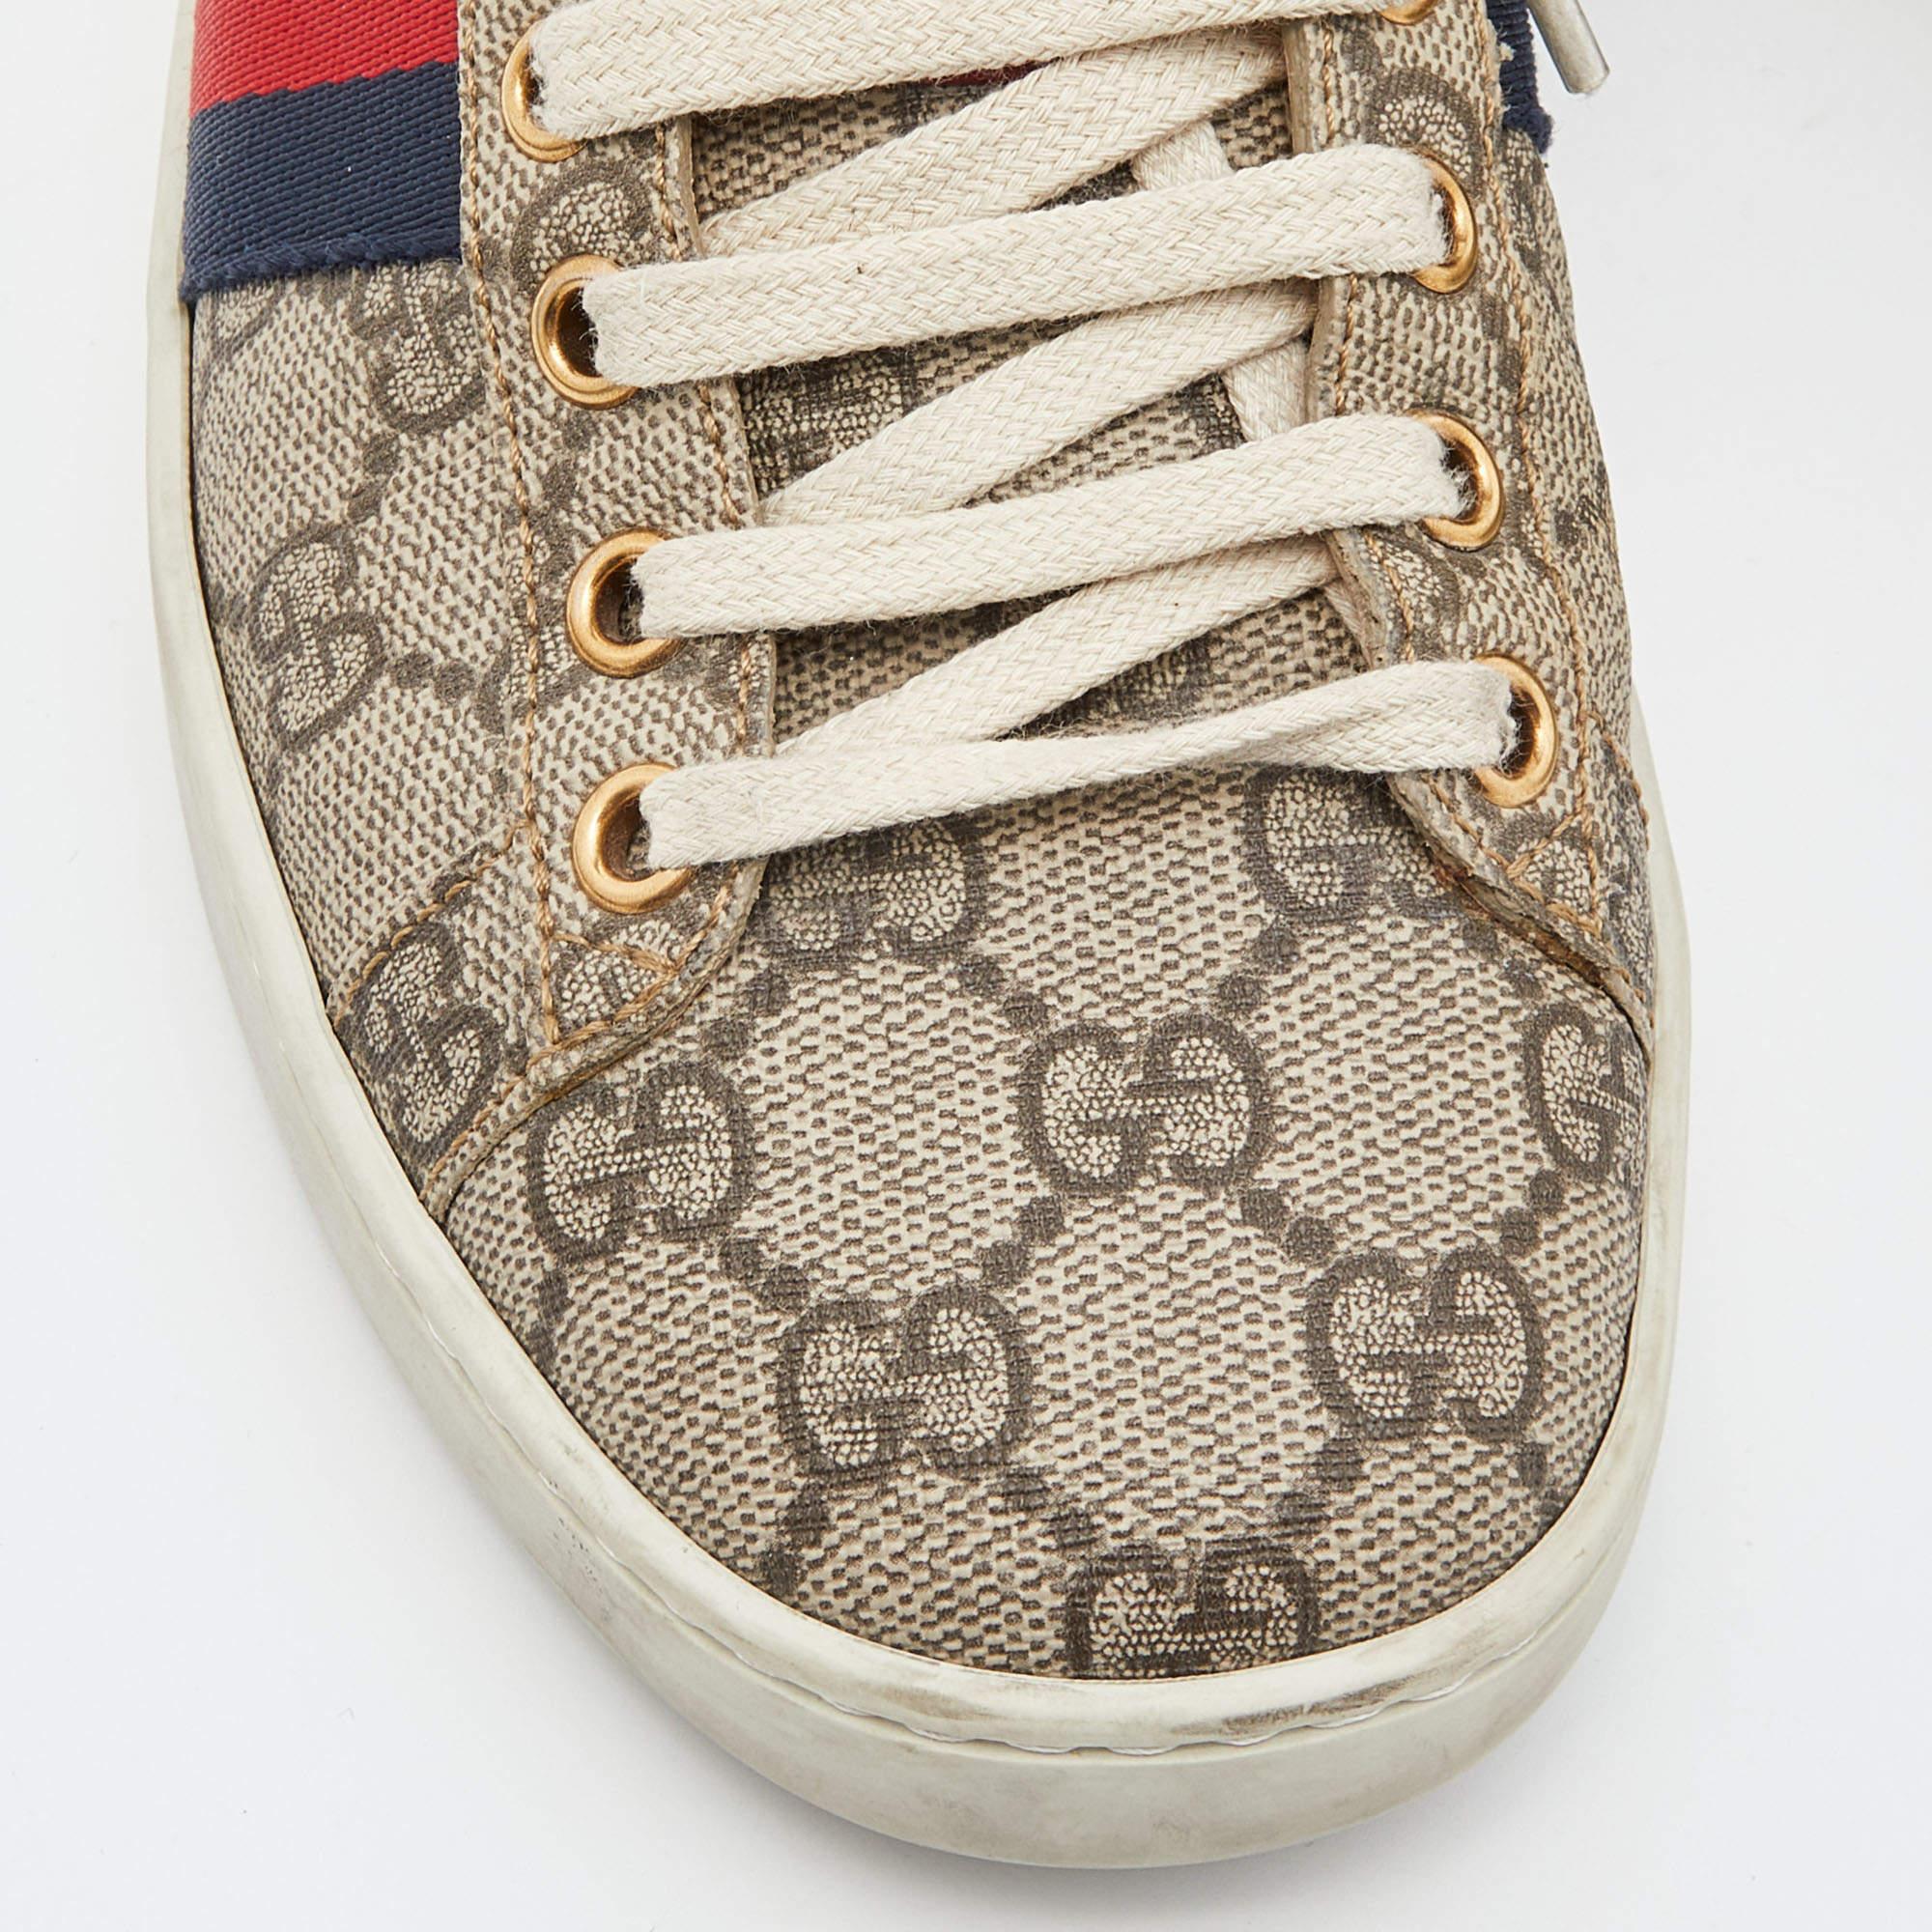 Gucci Beige/Brown GG Supreme Canvas Ace Sneakers Size 37 2